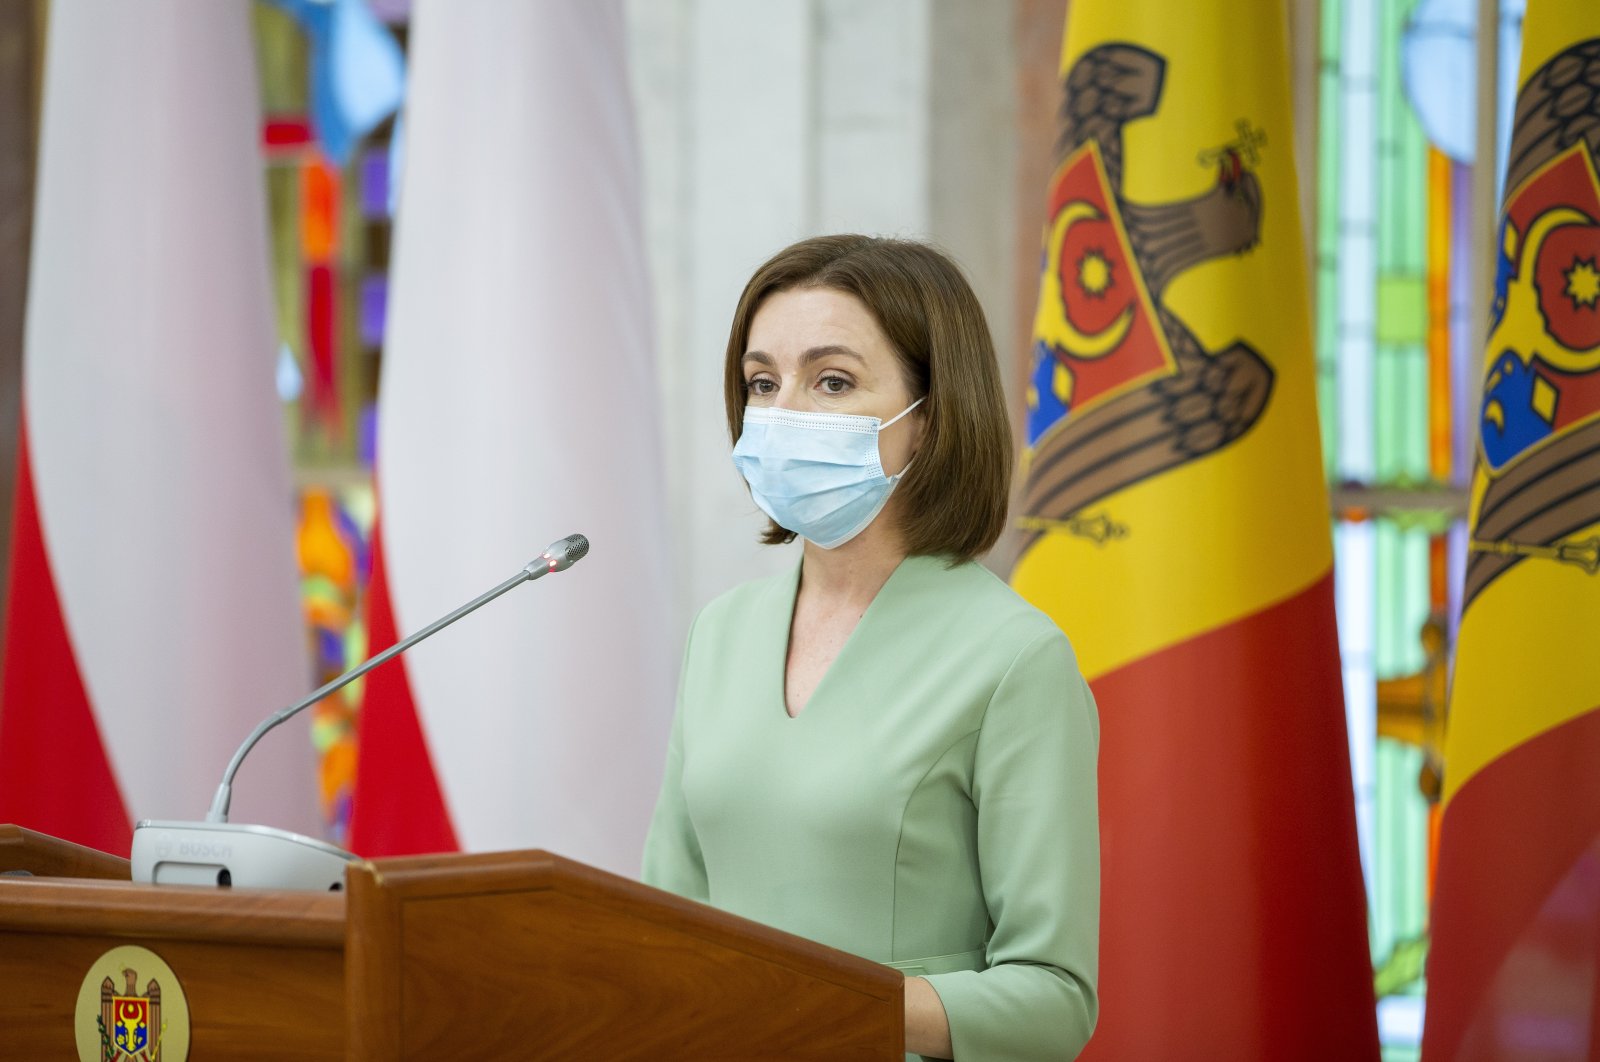 Moldovan President Maia Sandu during a joint press briefing with Polish President Duda (not pictured) at the Presidential Palace, in Chisinau, Moldova, Aug. 26, 2021. (EPA Photo)